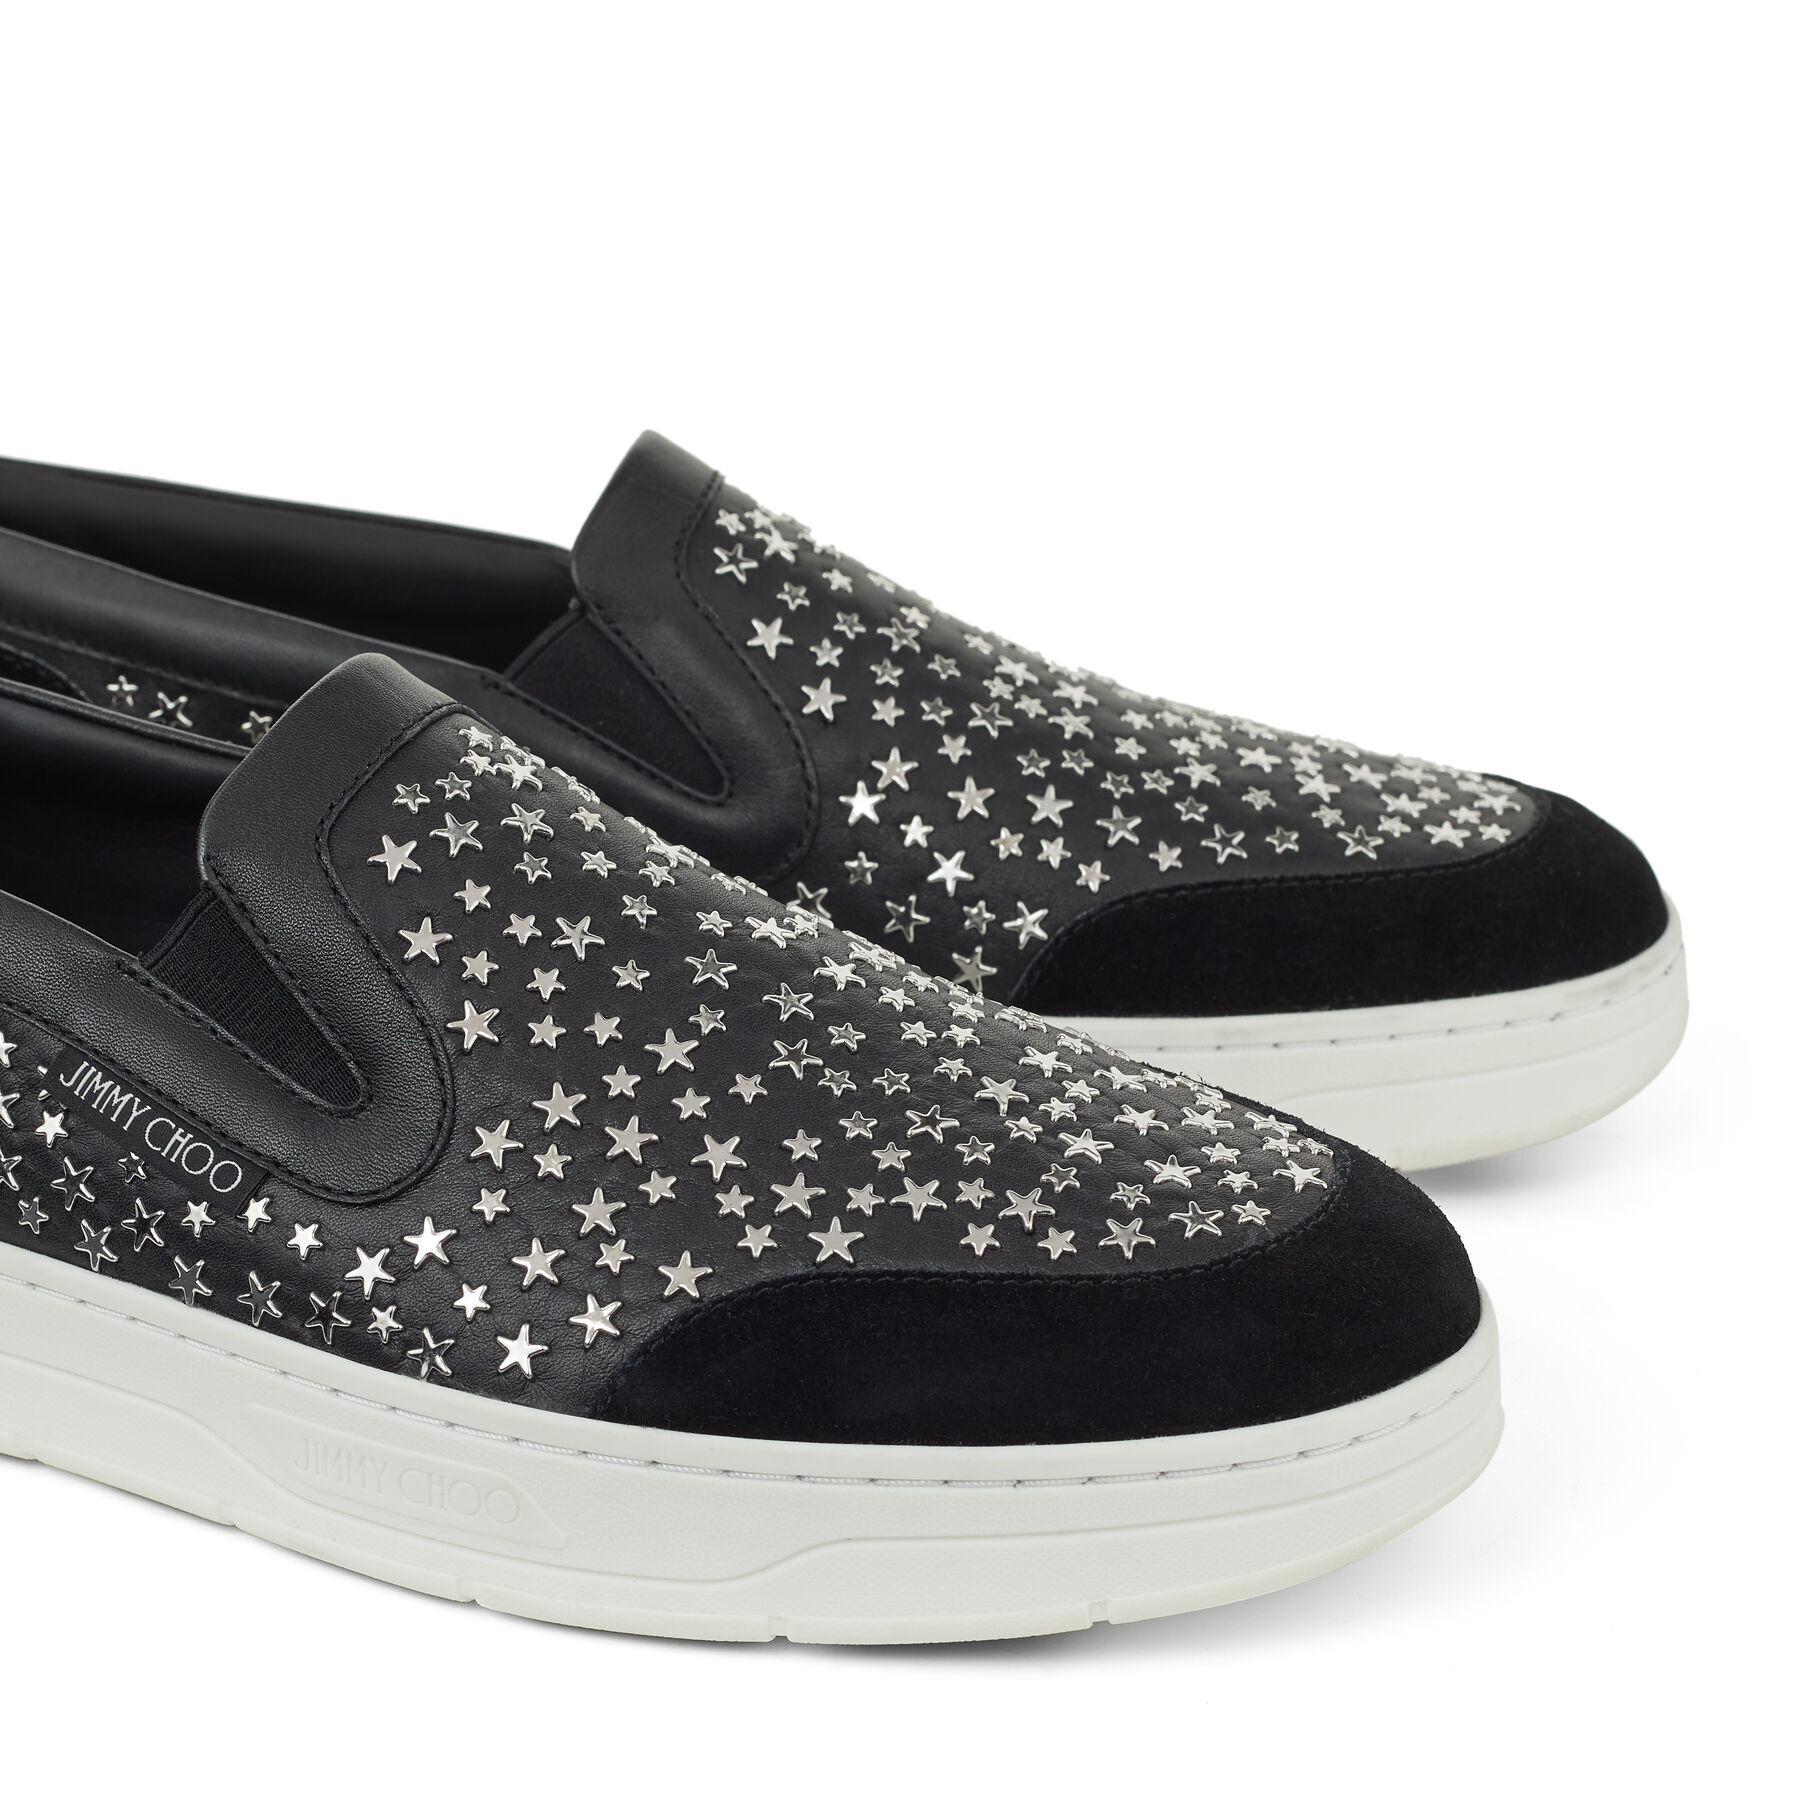 Black Calf Leather and Crosta Suede Slip-On Trainers with Star